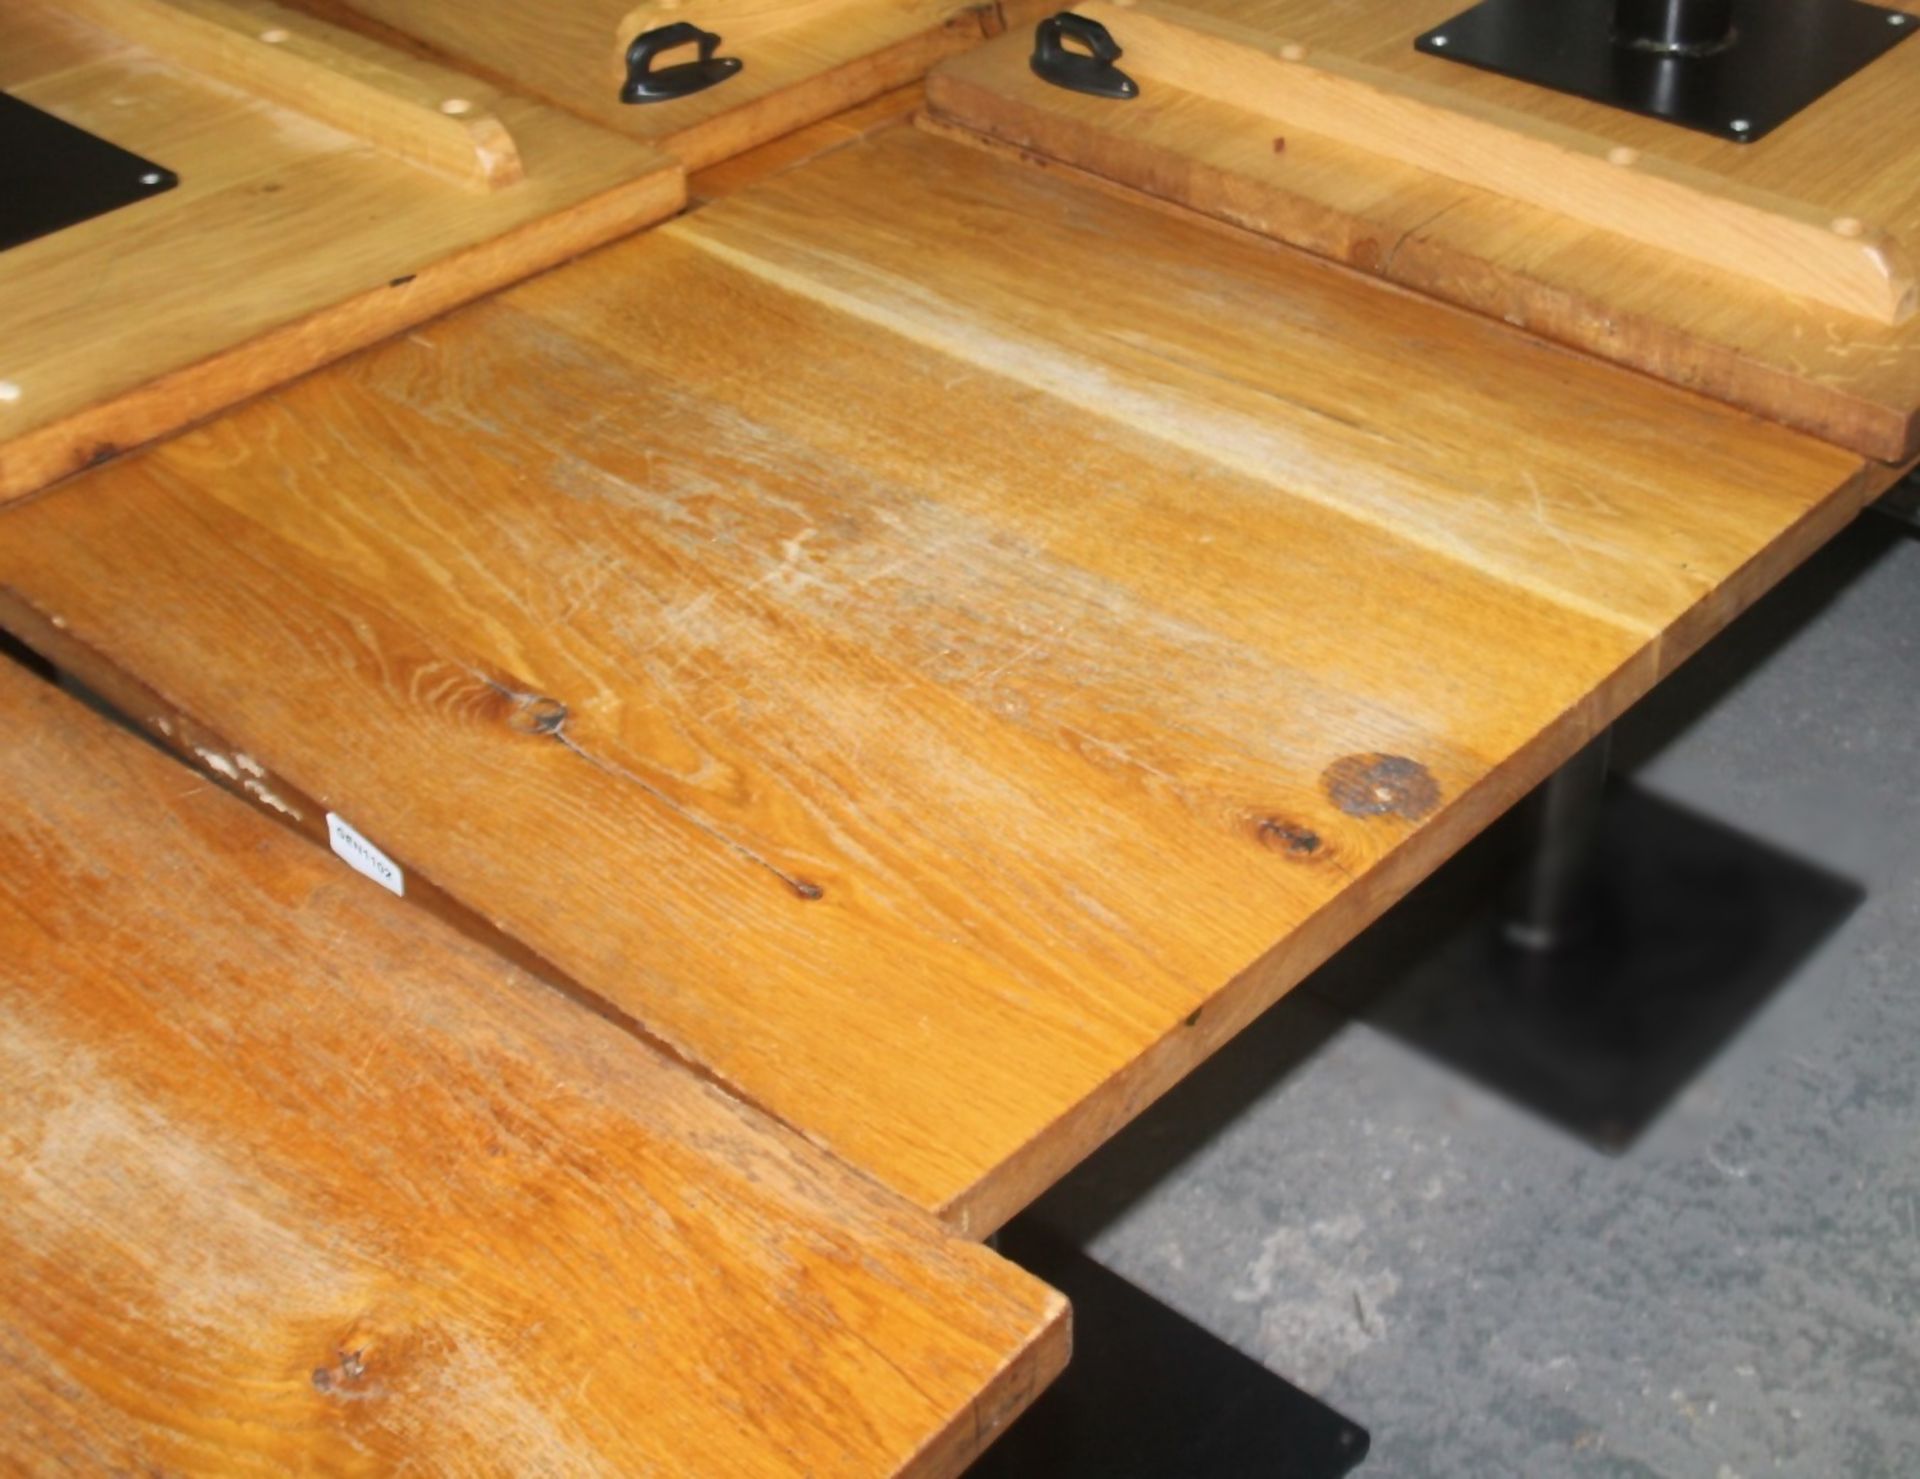 4 x Solid Oak Restaurant Dining Tables - Natural Rustic Knotty Oak Tops With Black Cast Iron Bases - - Image 7 of 7